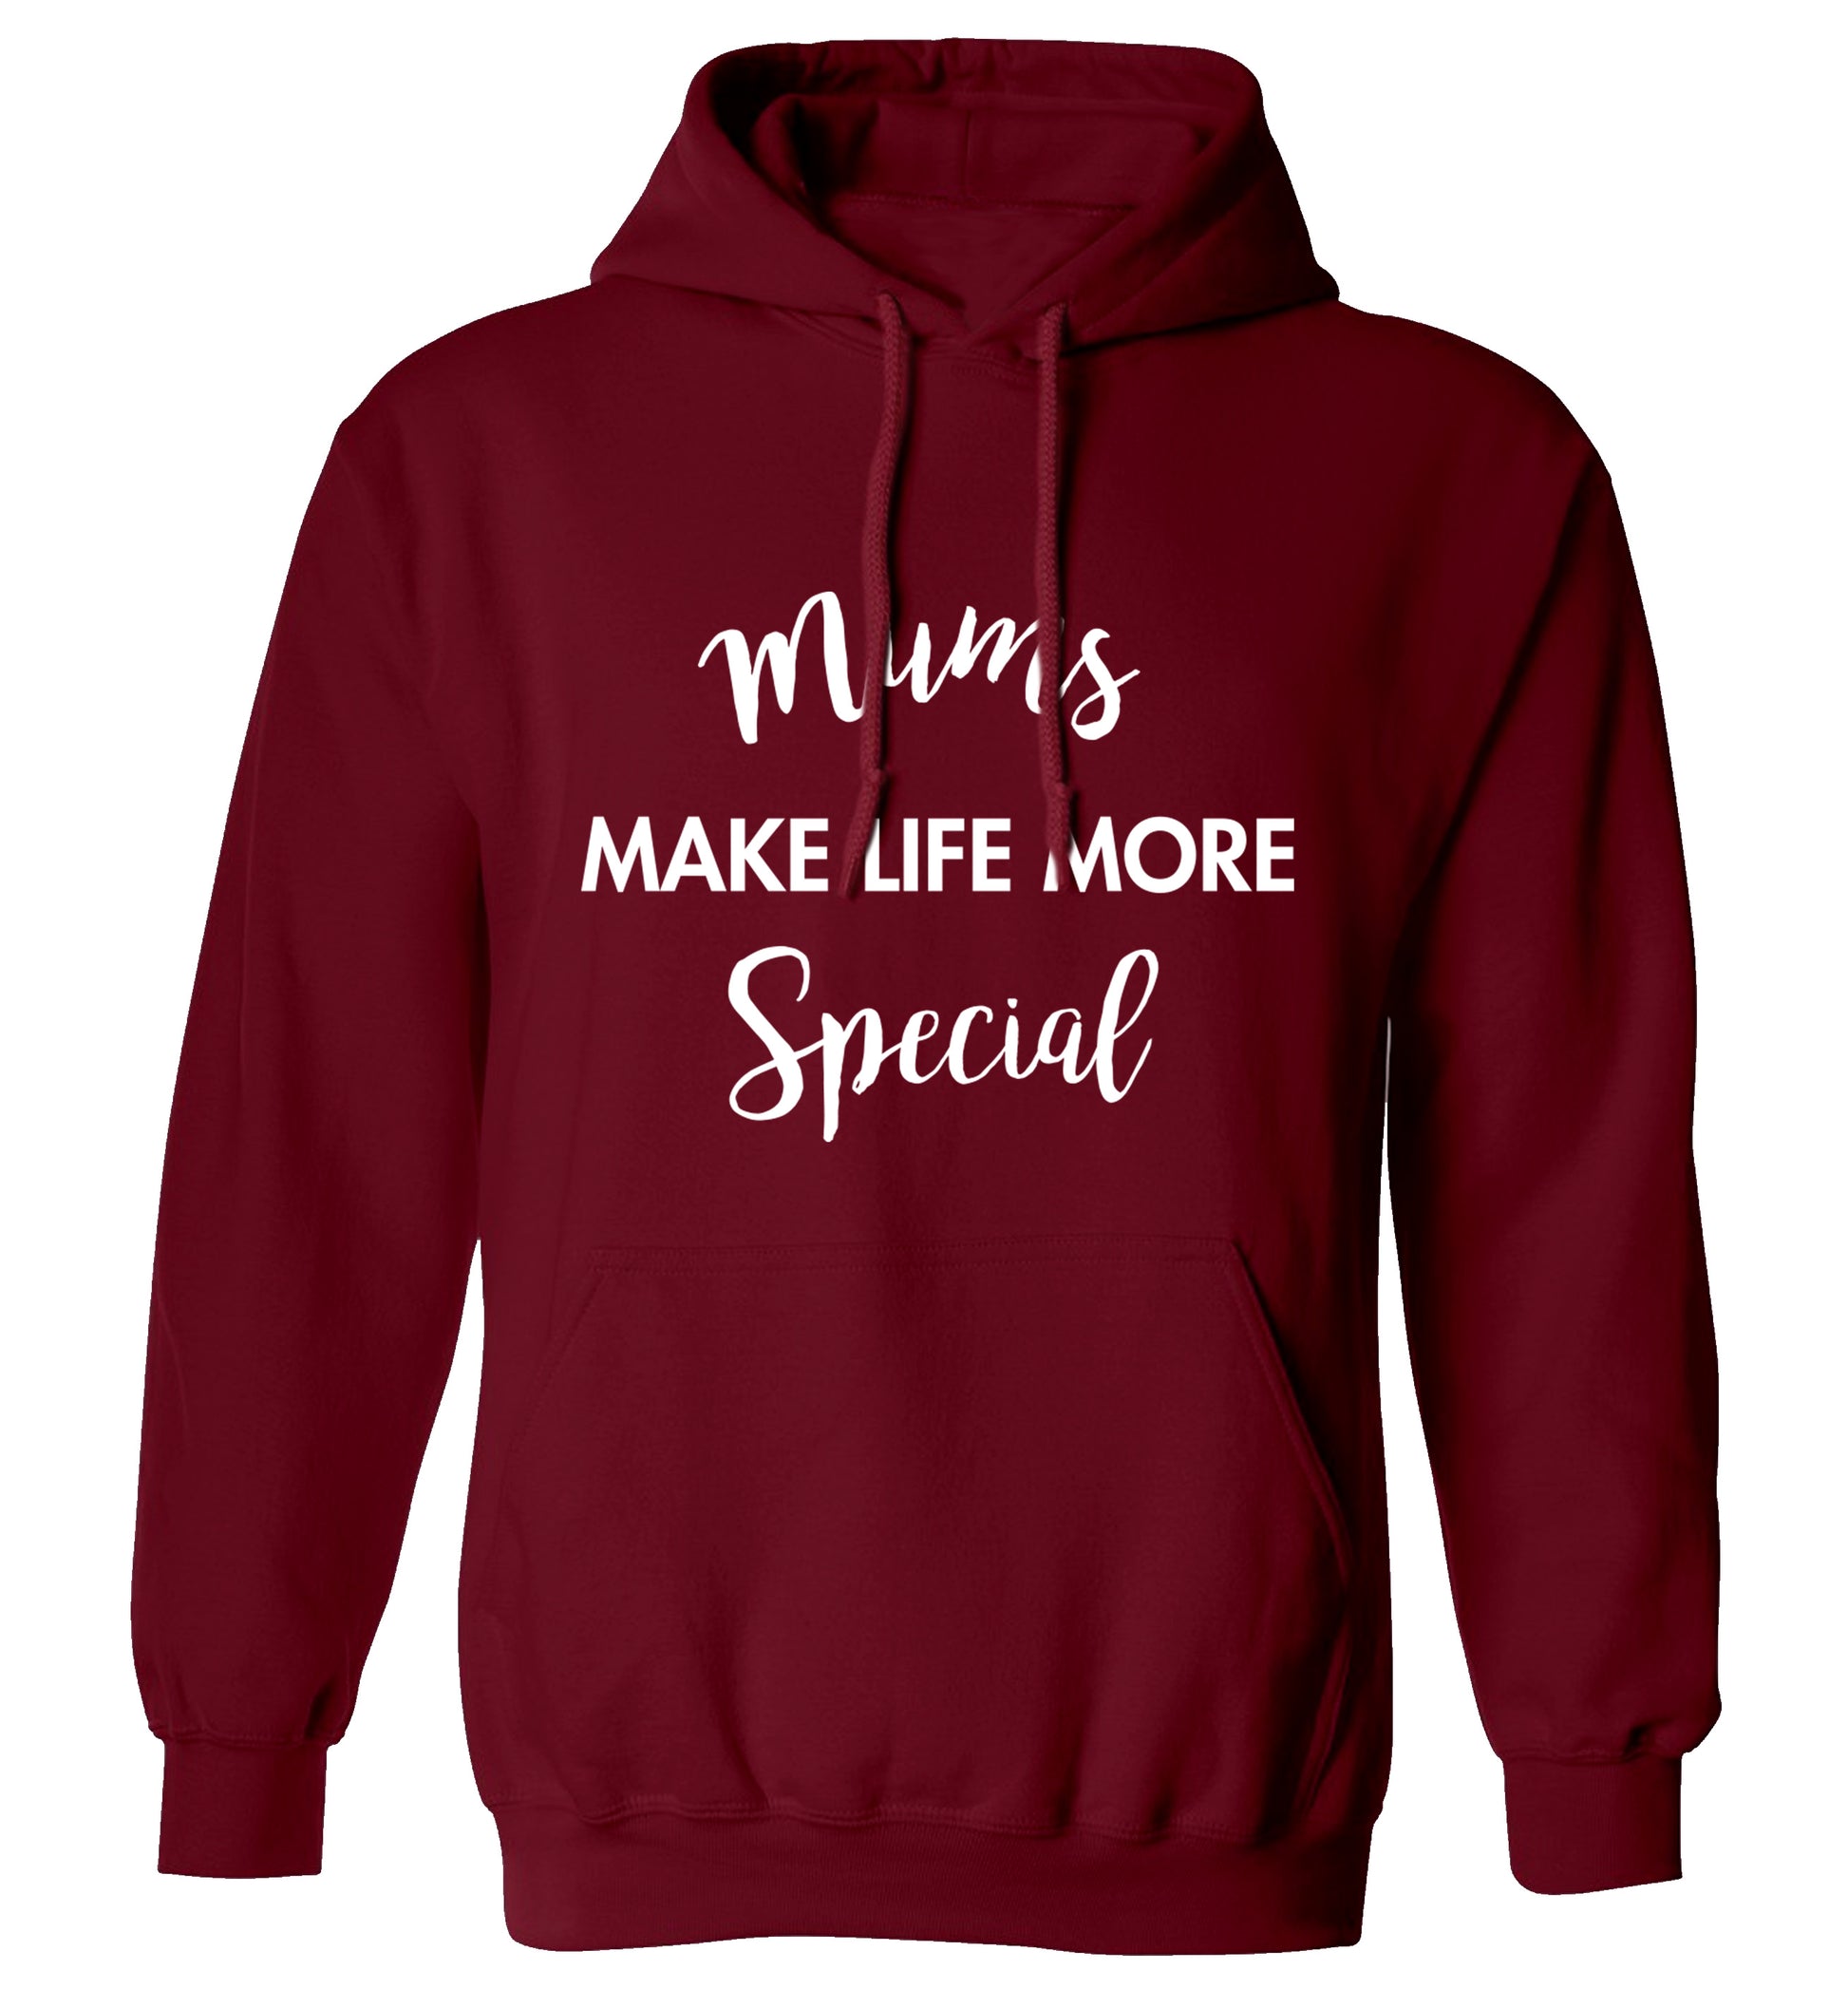 Mum's make life more special adults unisex maroon hoodie 2XL